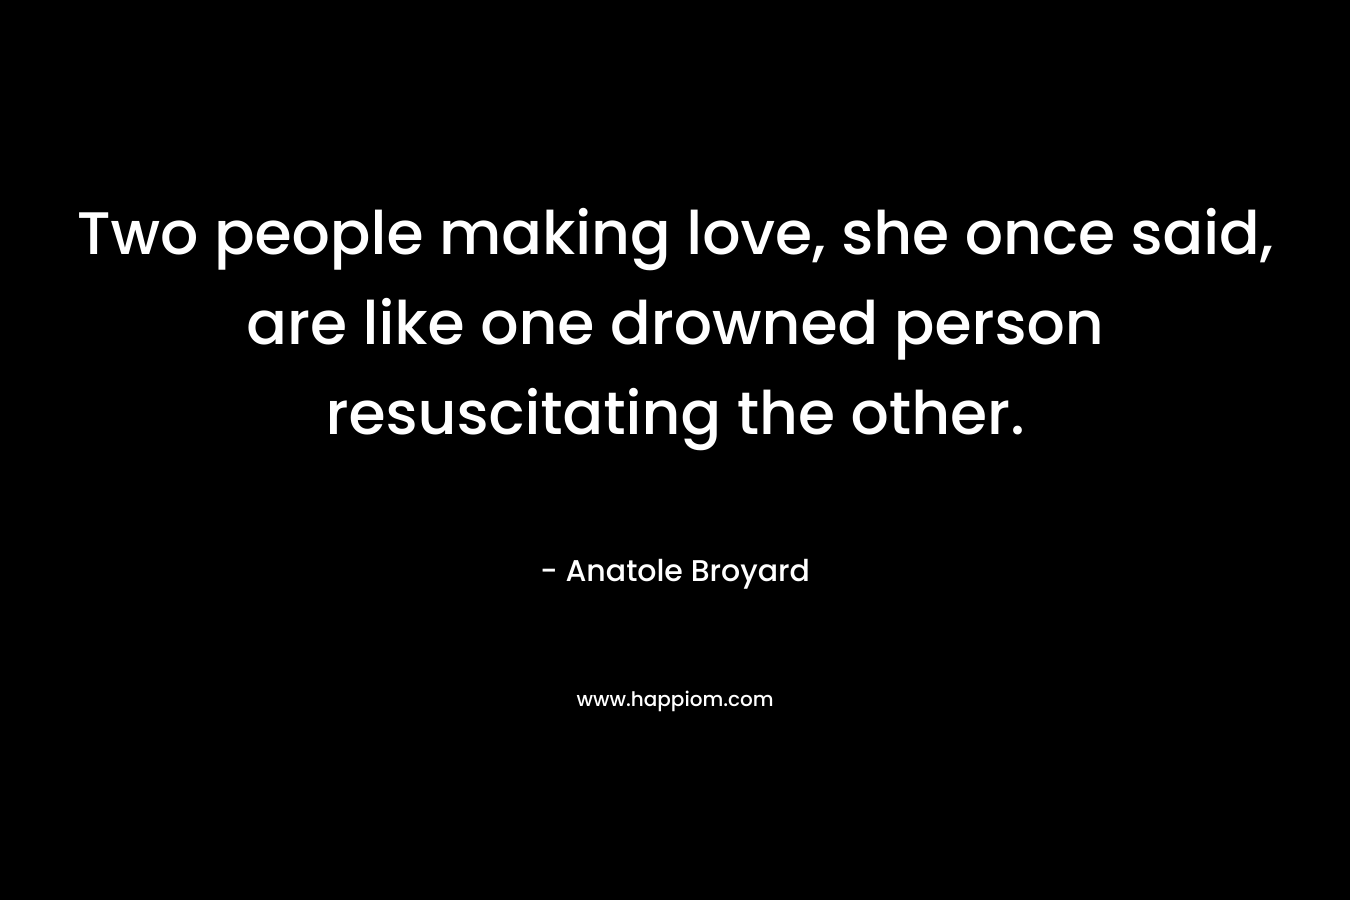 Two people making love, she once said, are like one drowned person resuscitating the other.